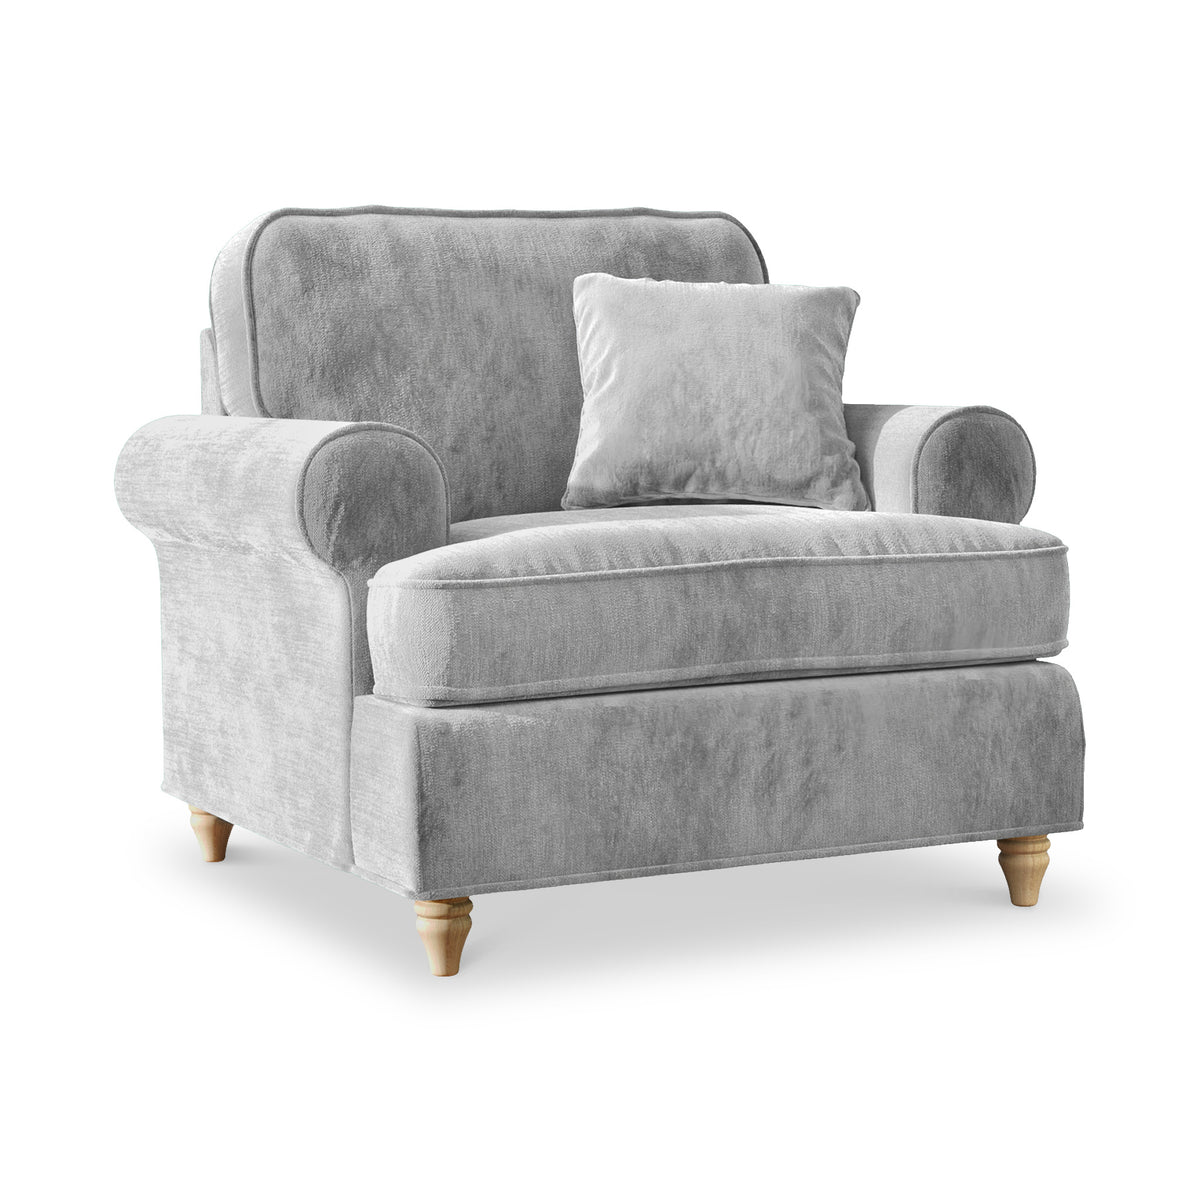 Alfie Armchair in Ice by Roseland Furniture